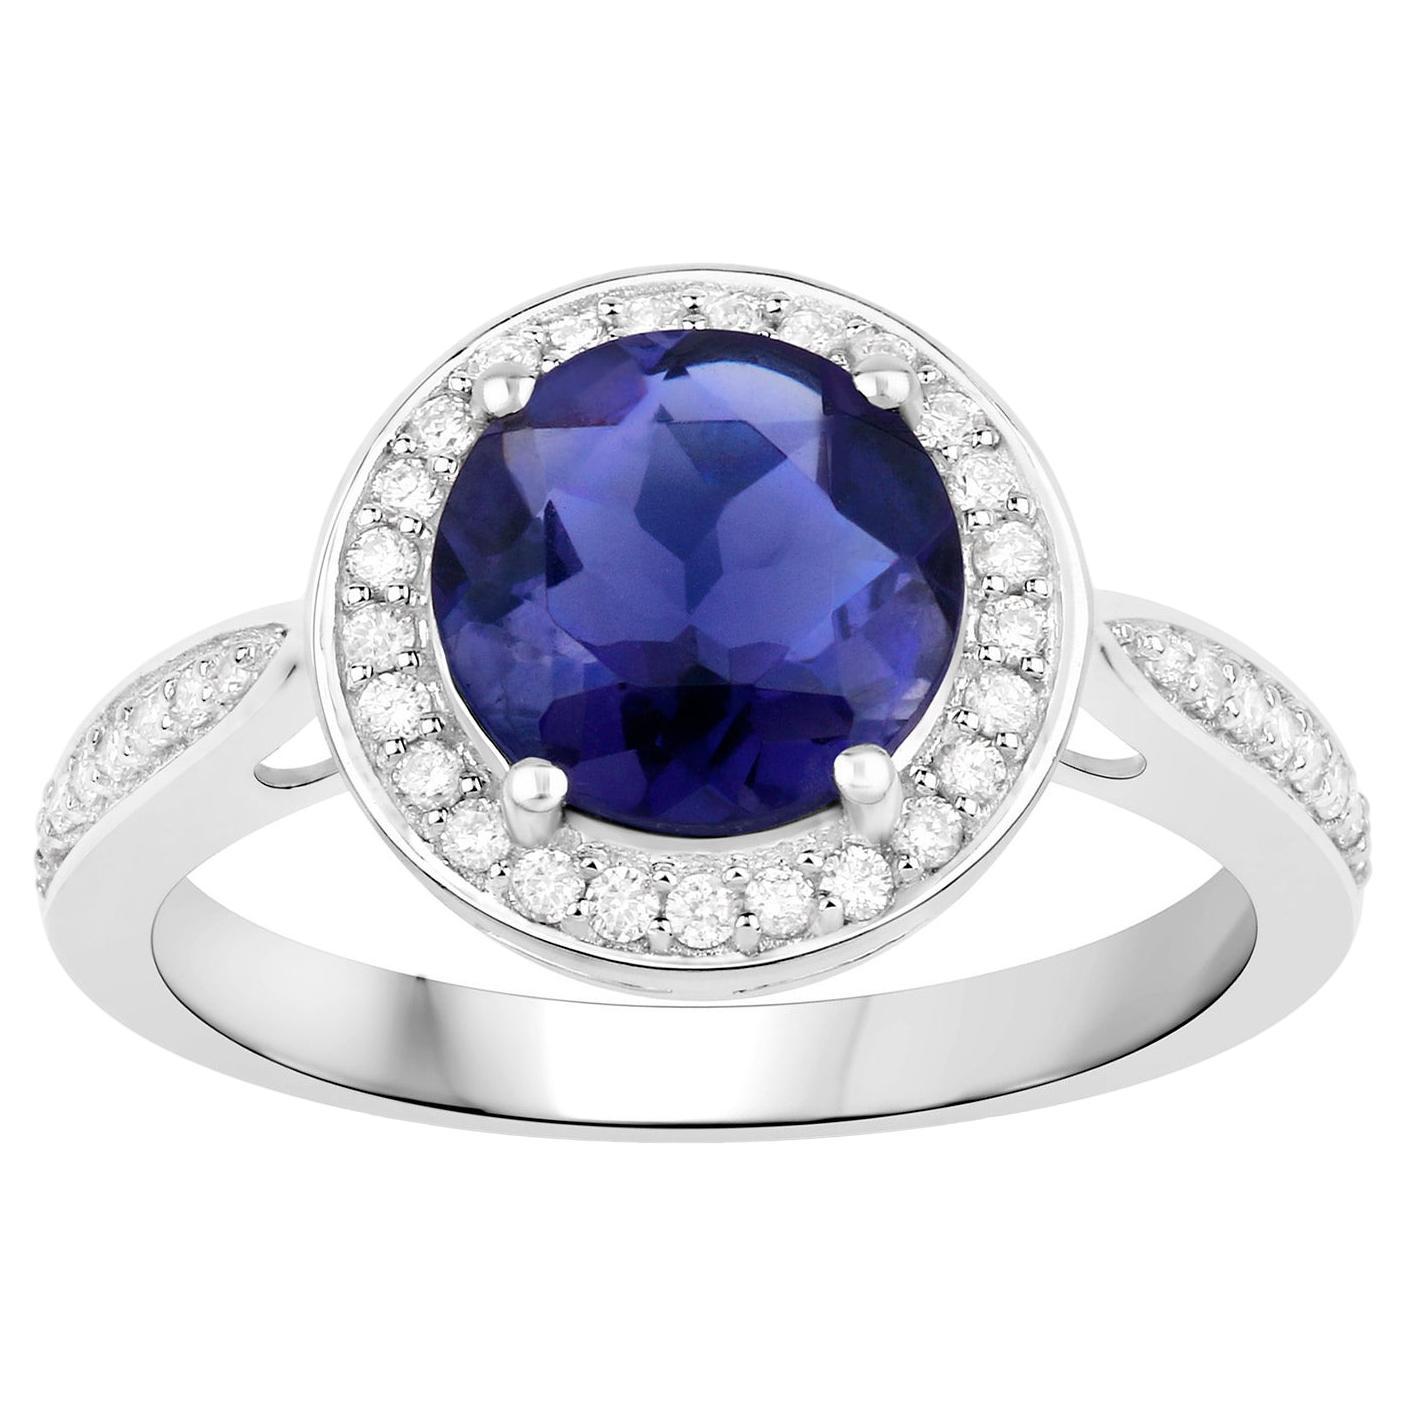 Iolite Ring With Diamonds 1.79 Carats 14K White Gold